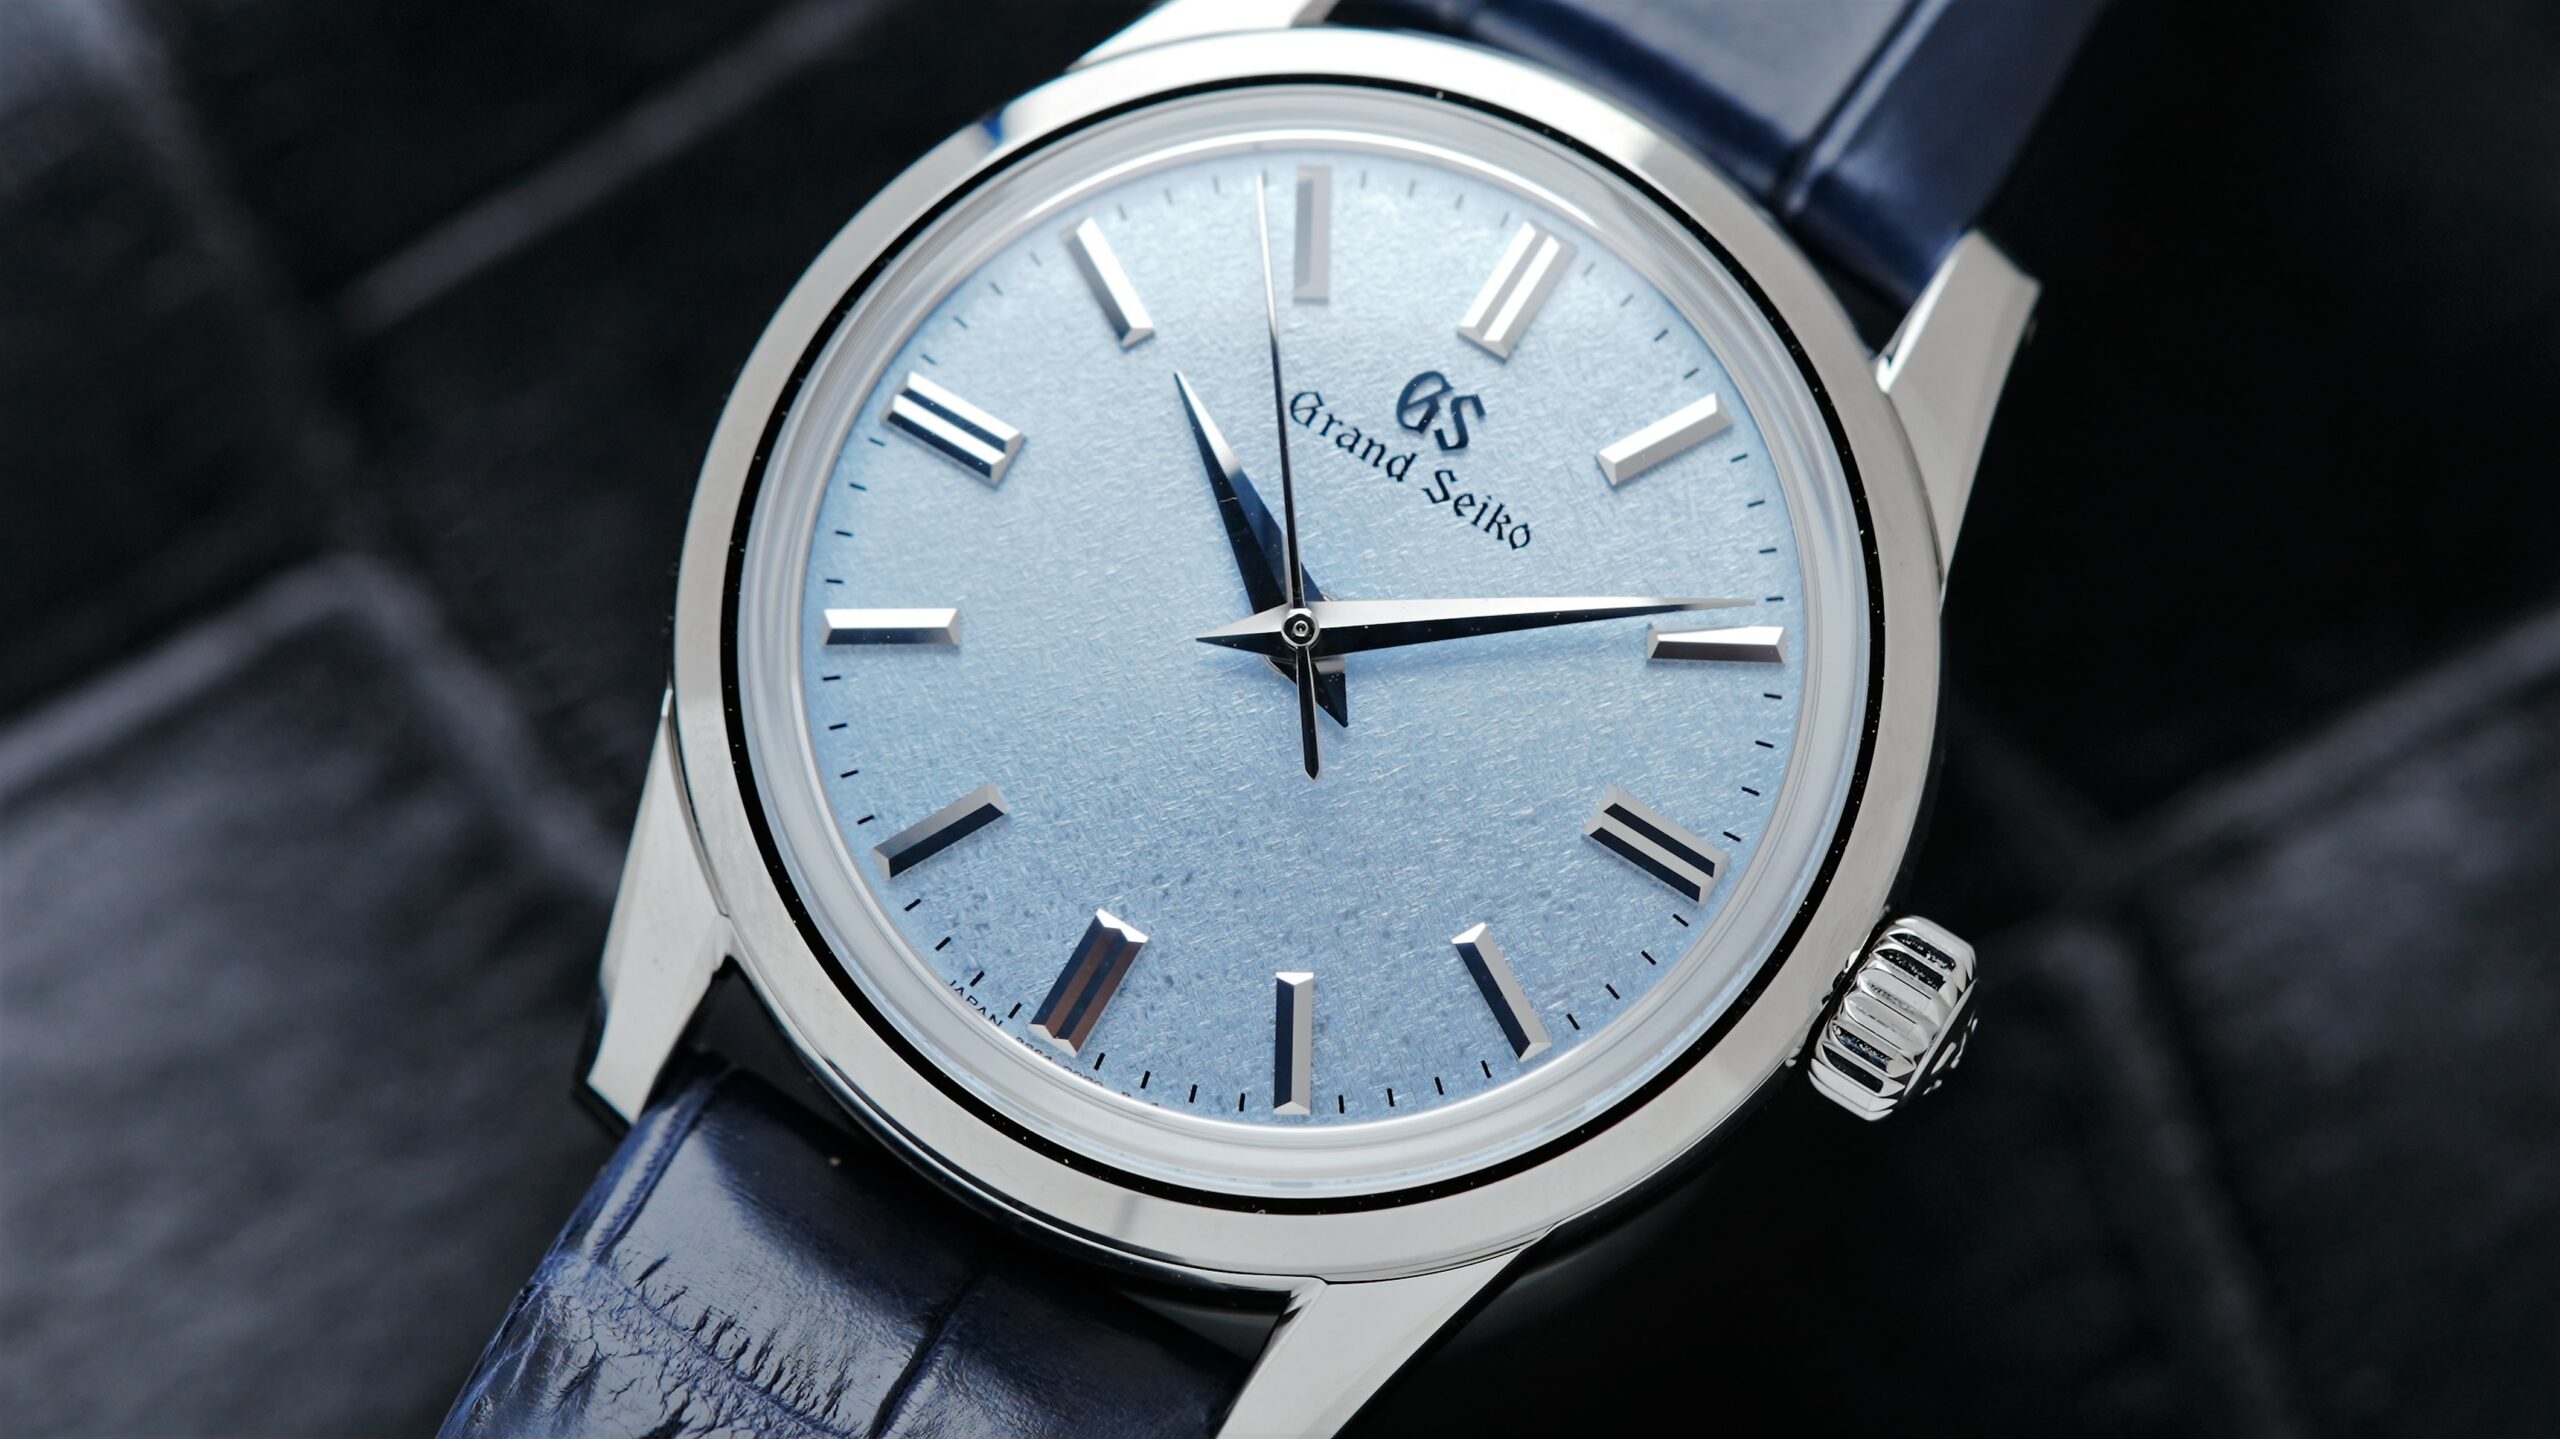 Elegant Grand Seiko watch with Ice Blue Dial featured up close on an angle.